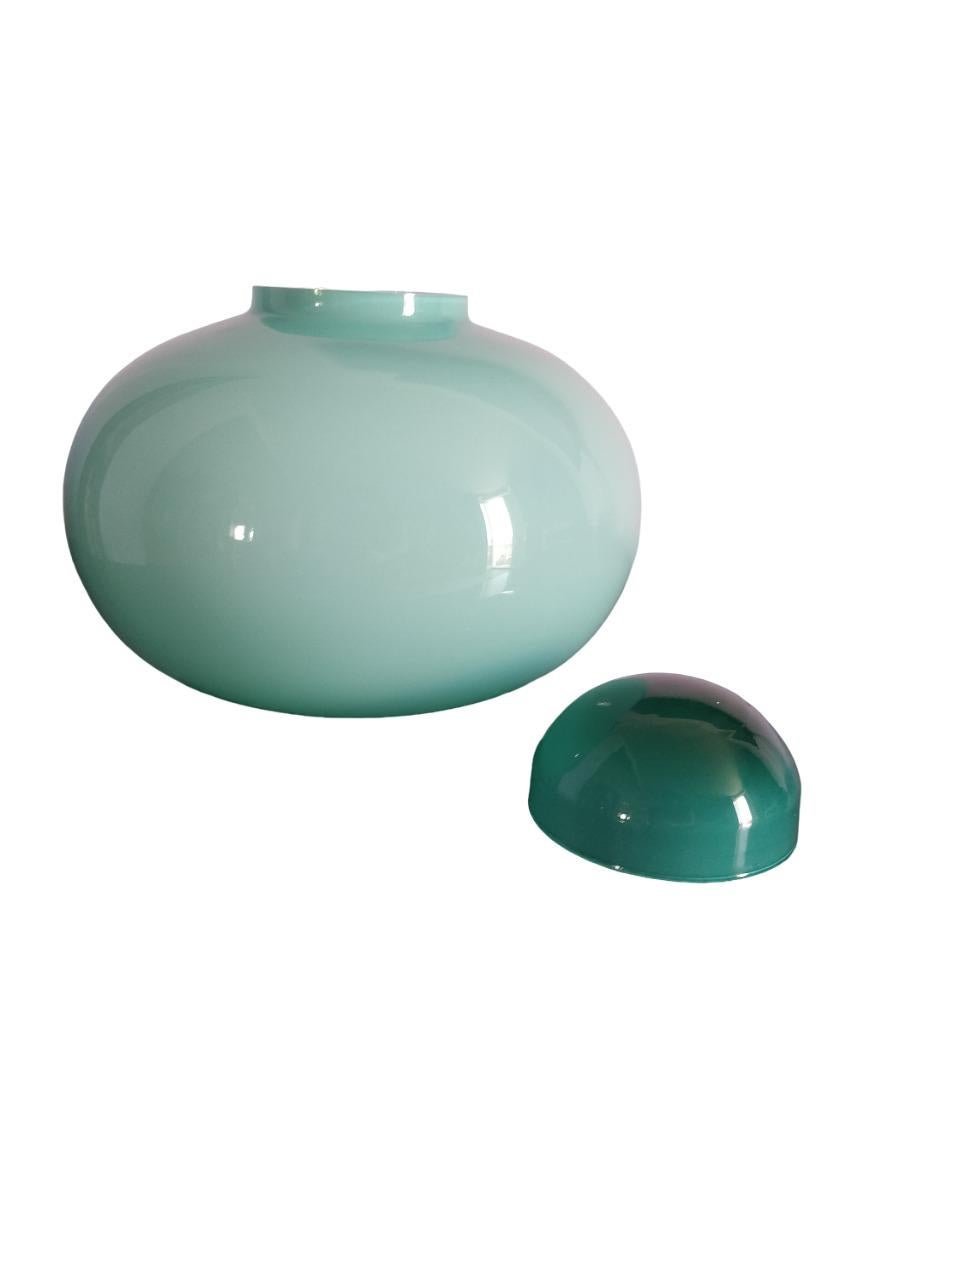 An around green vase with stopper Italy 1970's  IVV In Excellent Condition For Sale In Firenze, FI